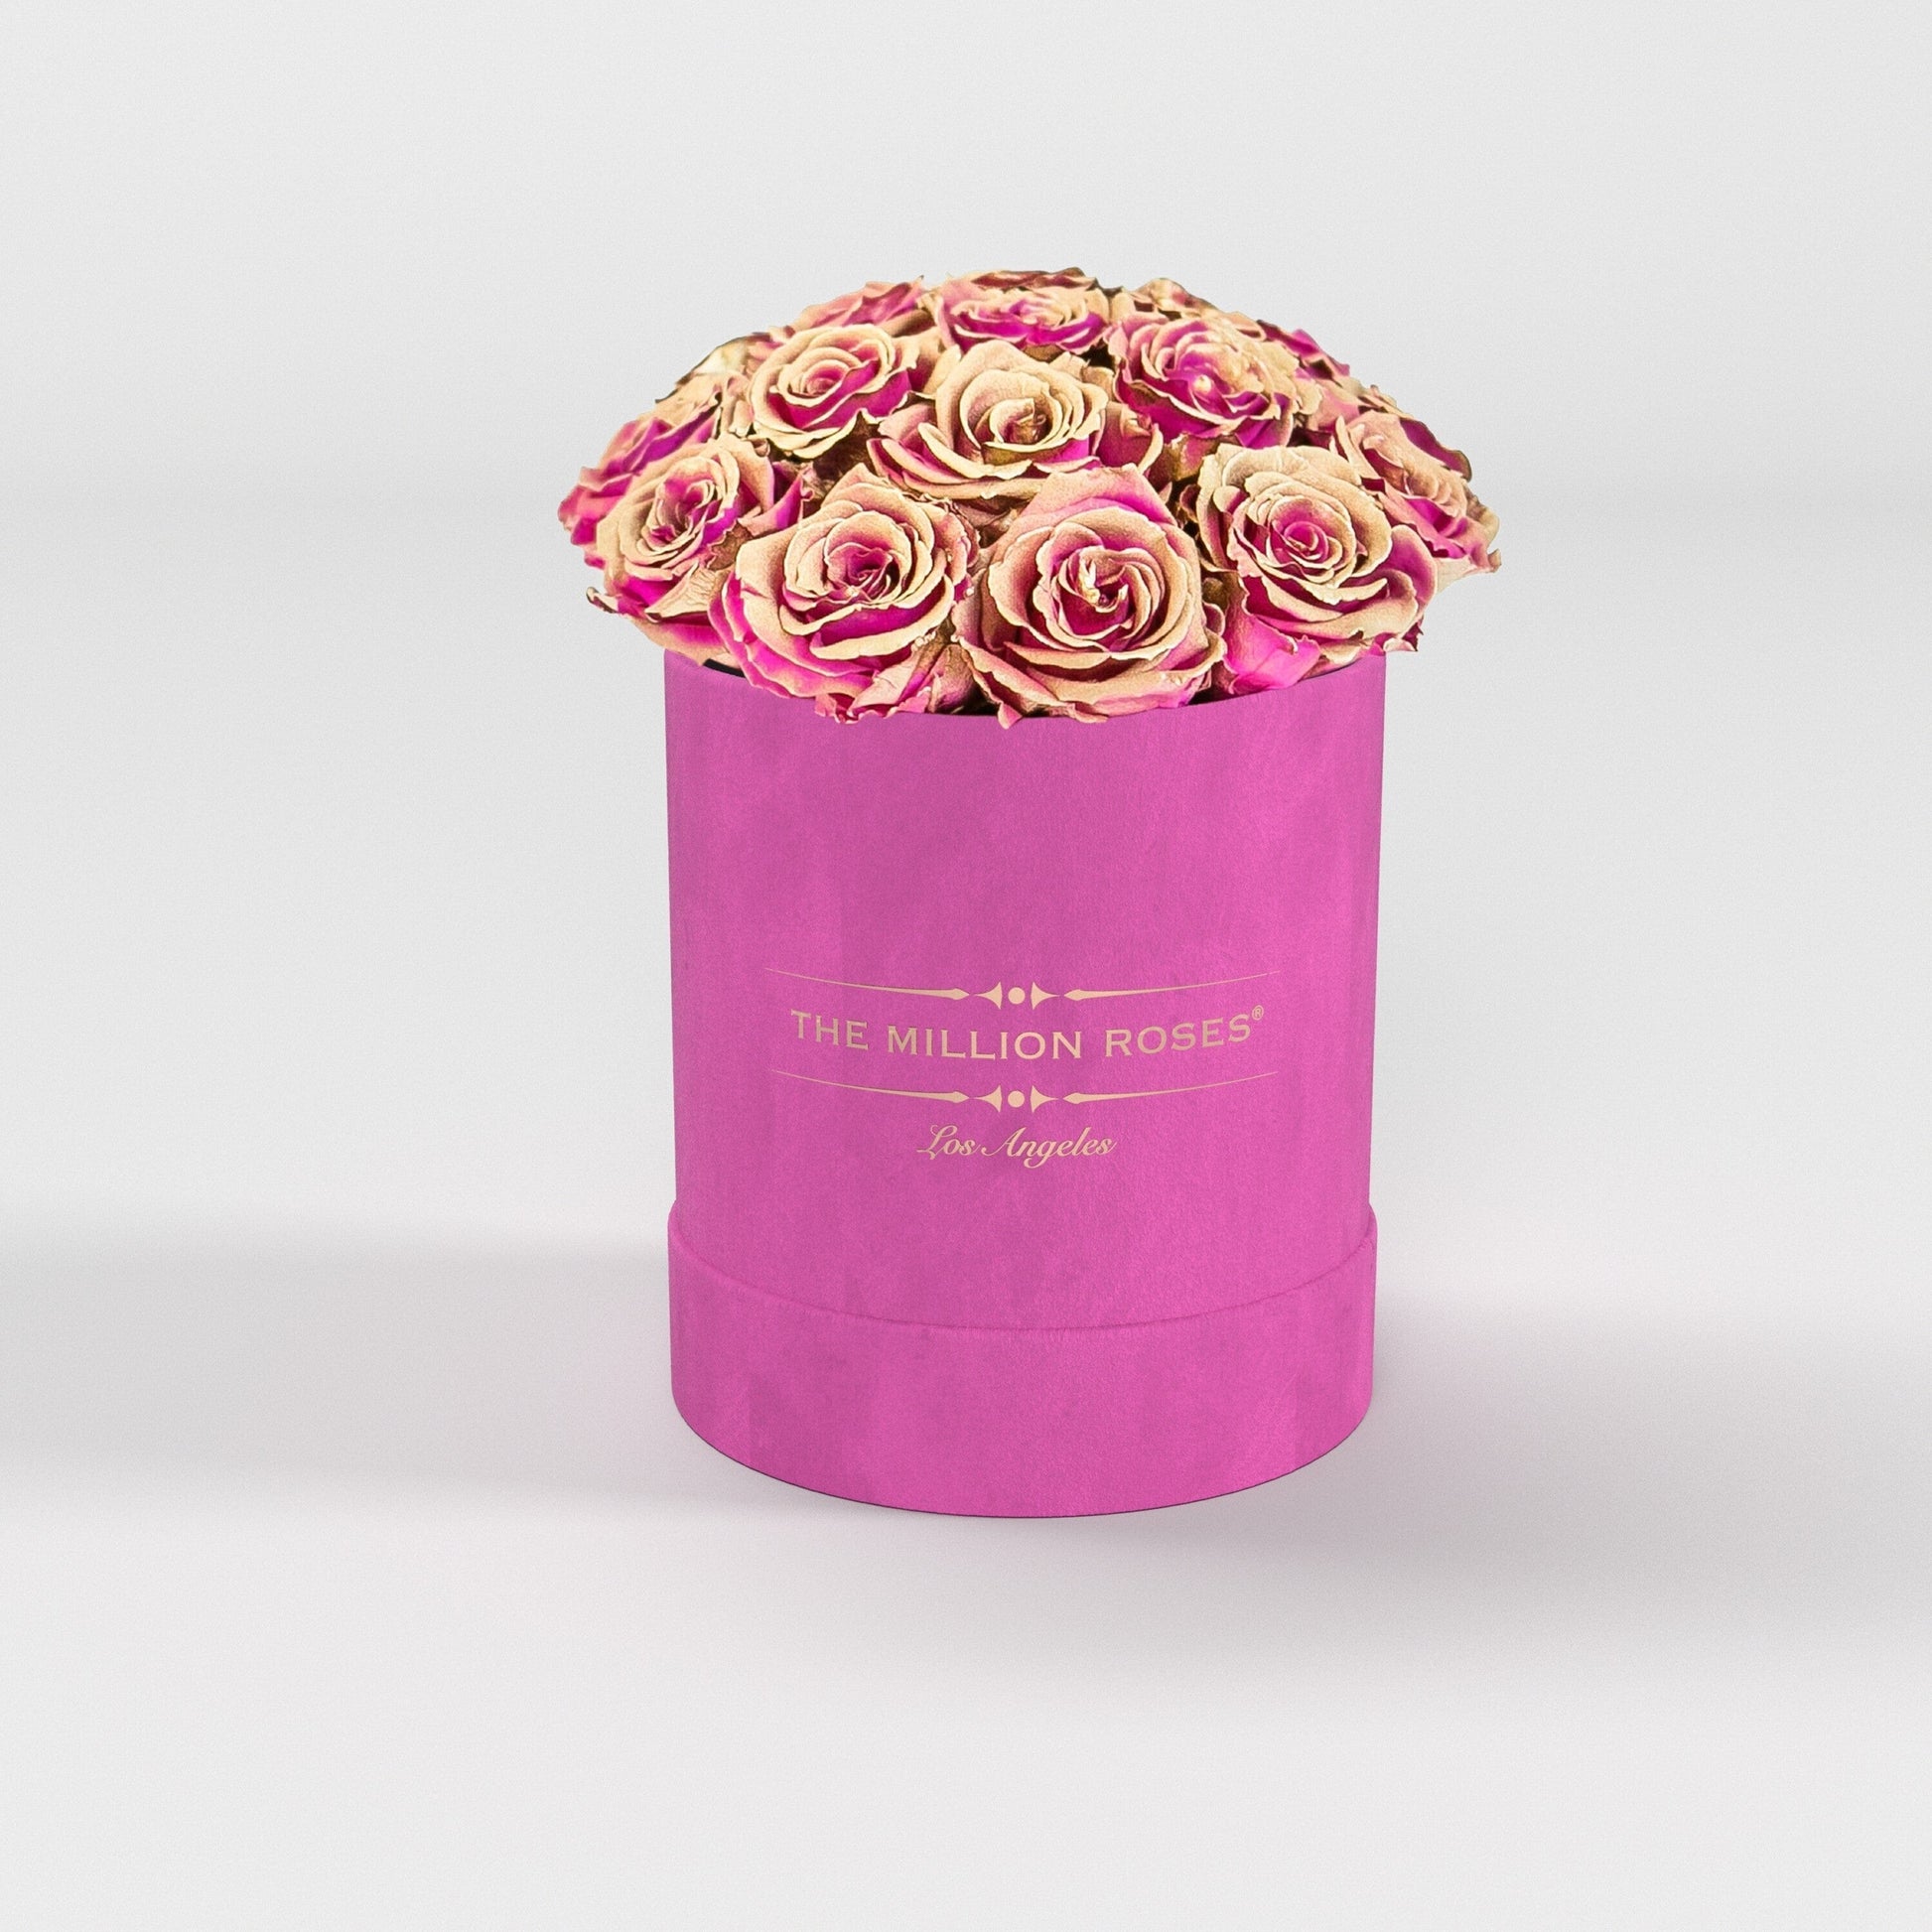 Basic Hot Pink Suede Box | Neon Pink & Gold Roses - The Million Roses